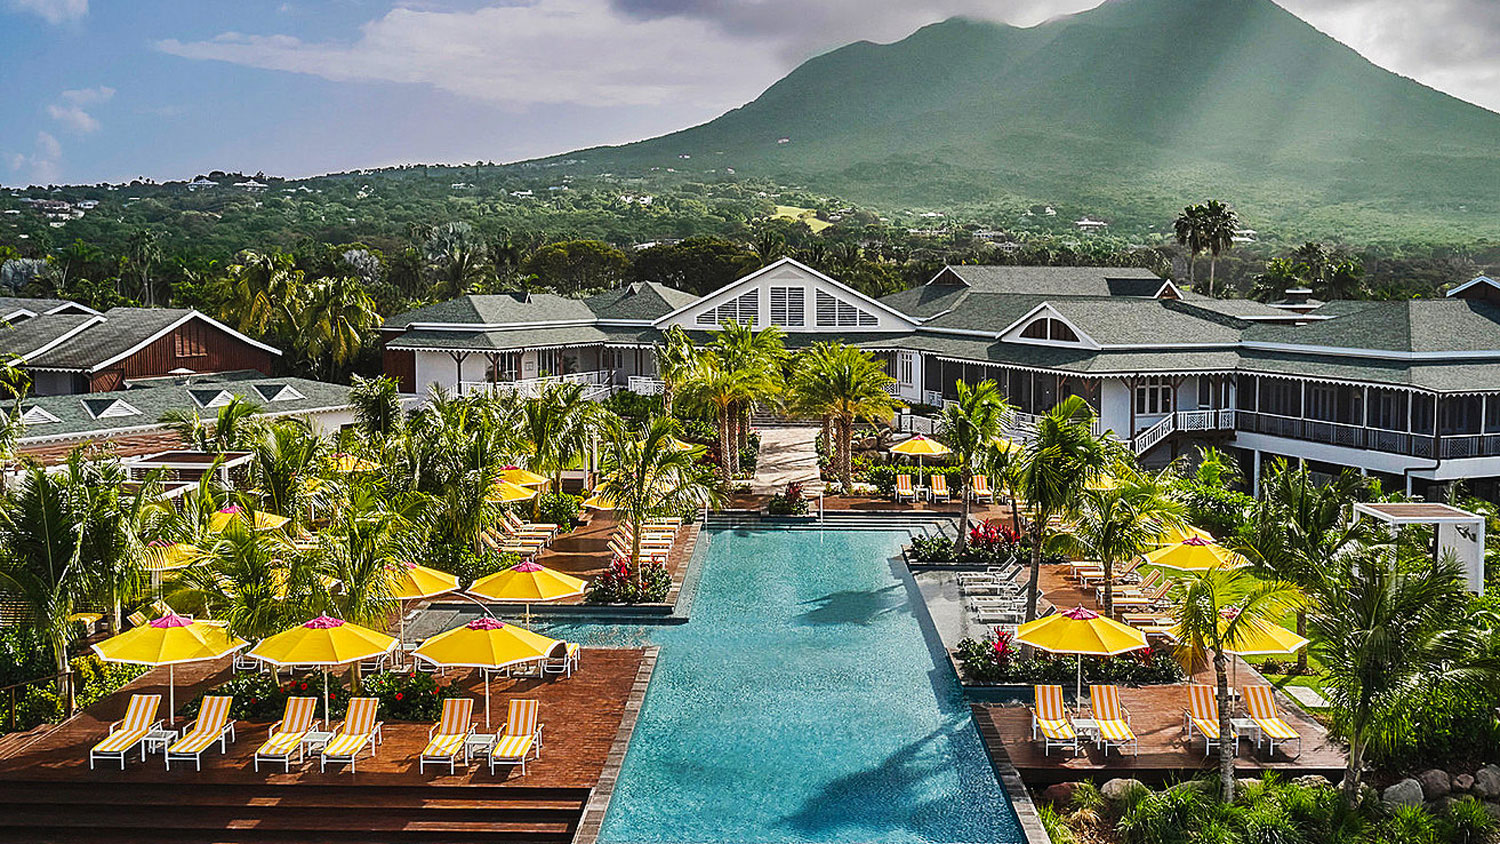 The Coolest Caribbean Island You’ve Never Heard Of: Nevis